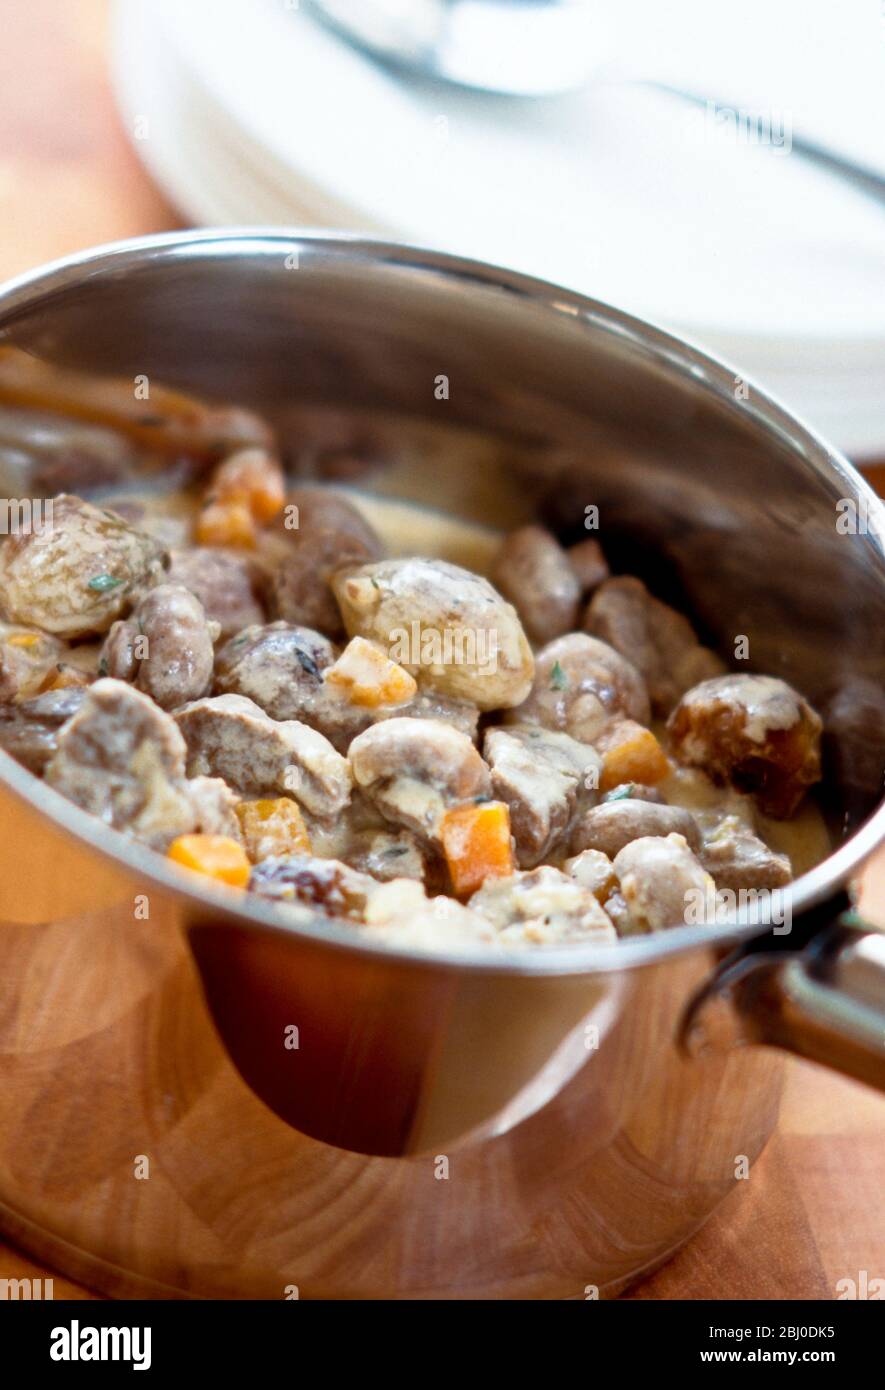 Classic French dish, blanquette de veau, being prepared in stainless steel saucepan - Stock Photo